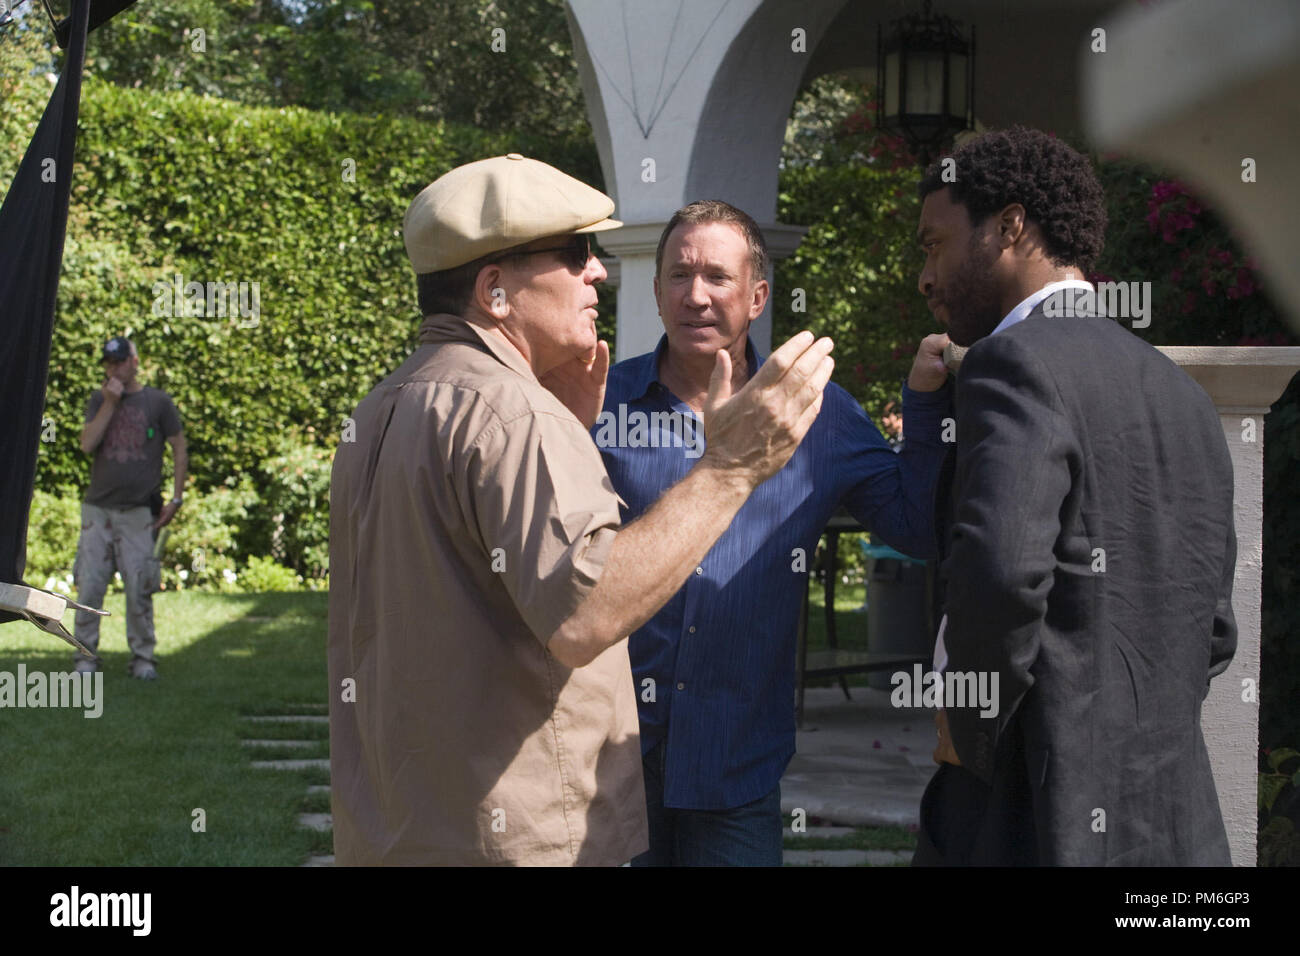 Film Still from 'Redbelt' Director David Mamet, Tim Allen, Chiwetel Ejiofor © 2008 Sony Pictures Classics Photo credit: Lorey Sebastian  File Reference # 30755738THA  For Editorial Use Only -  All Rights Reserved Stock Photo